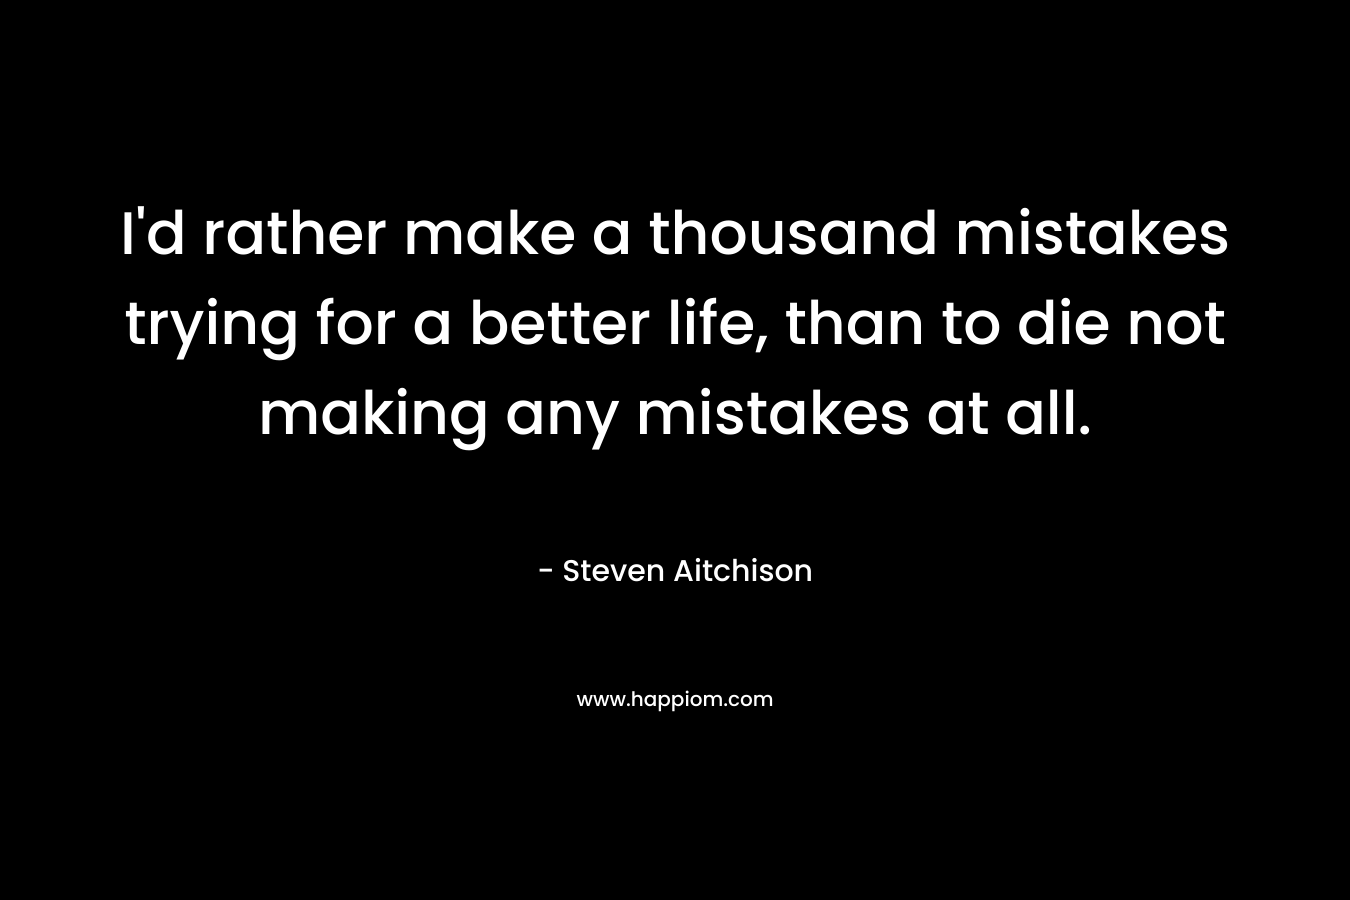 I'd rather make a thousand mistakes trying for a better life, than to die not making any mistakes at all.